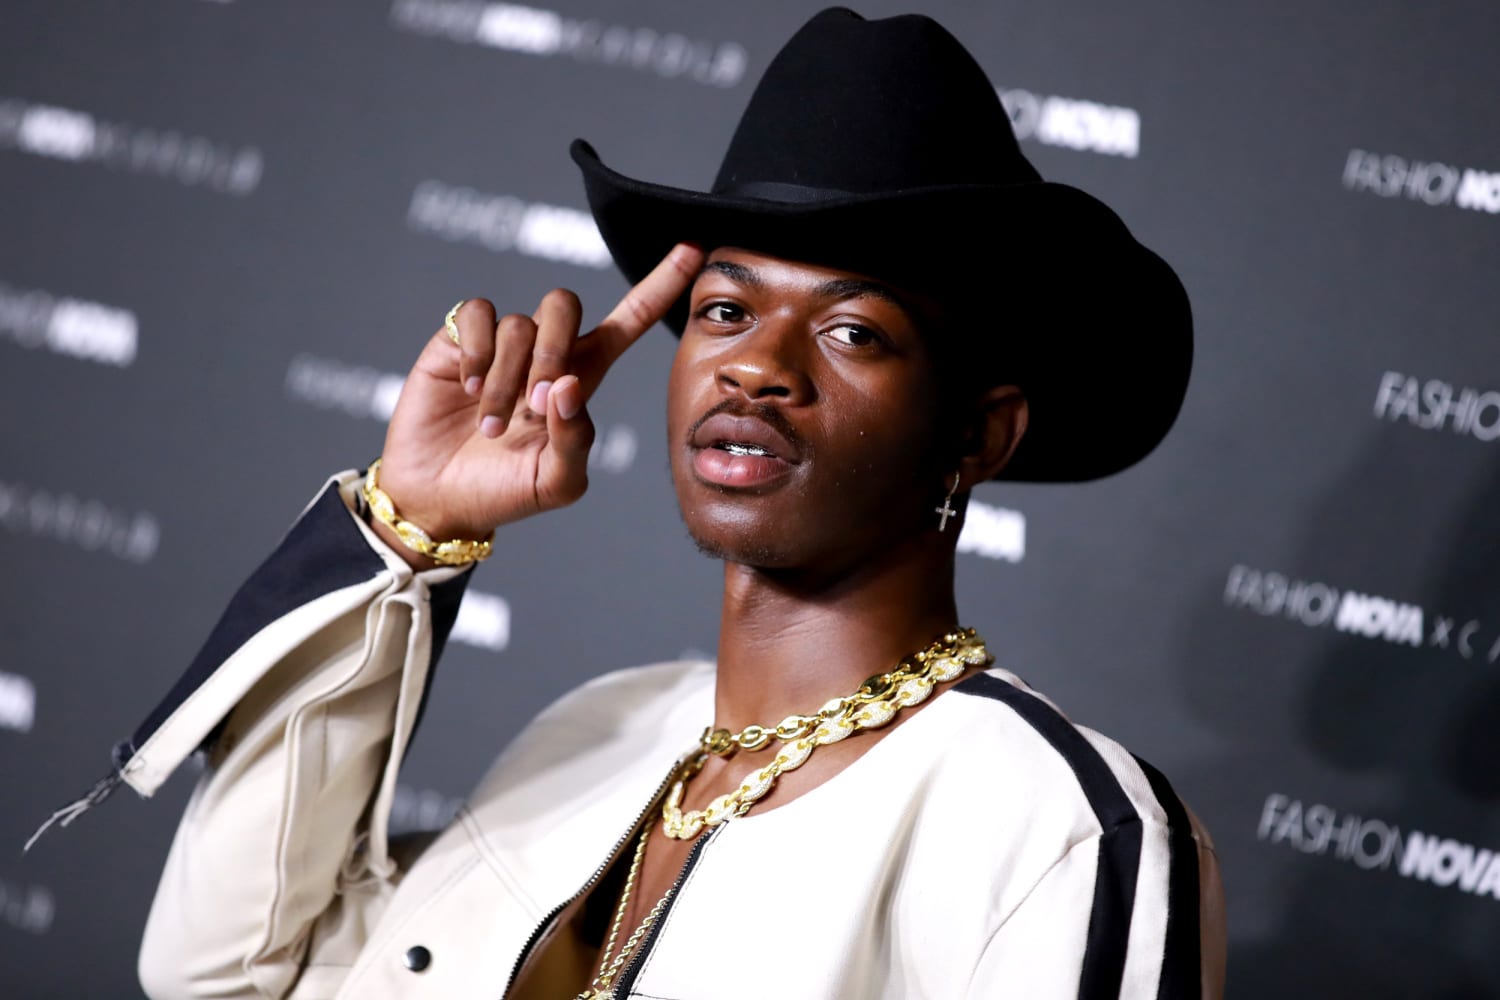 Old Town Road' rapper Lil Nas X appears to come out as gay